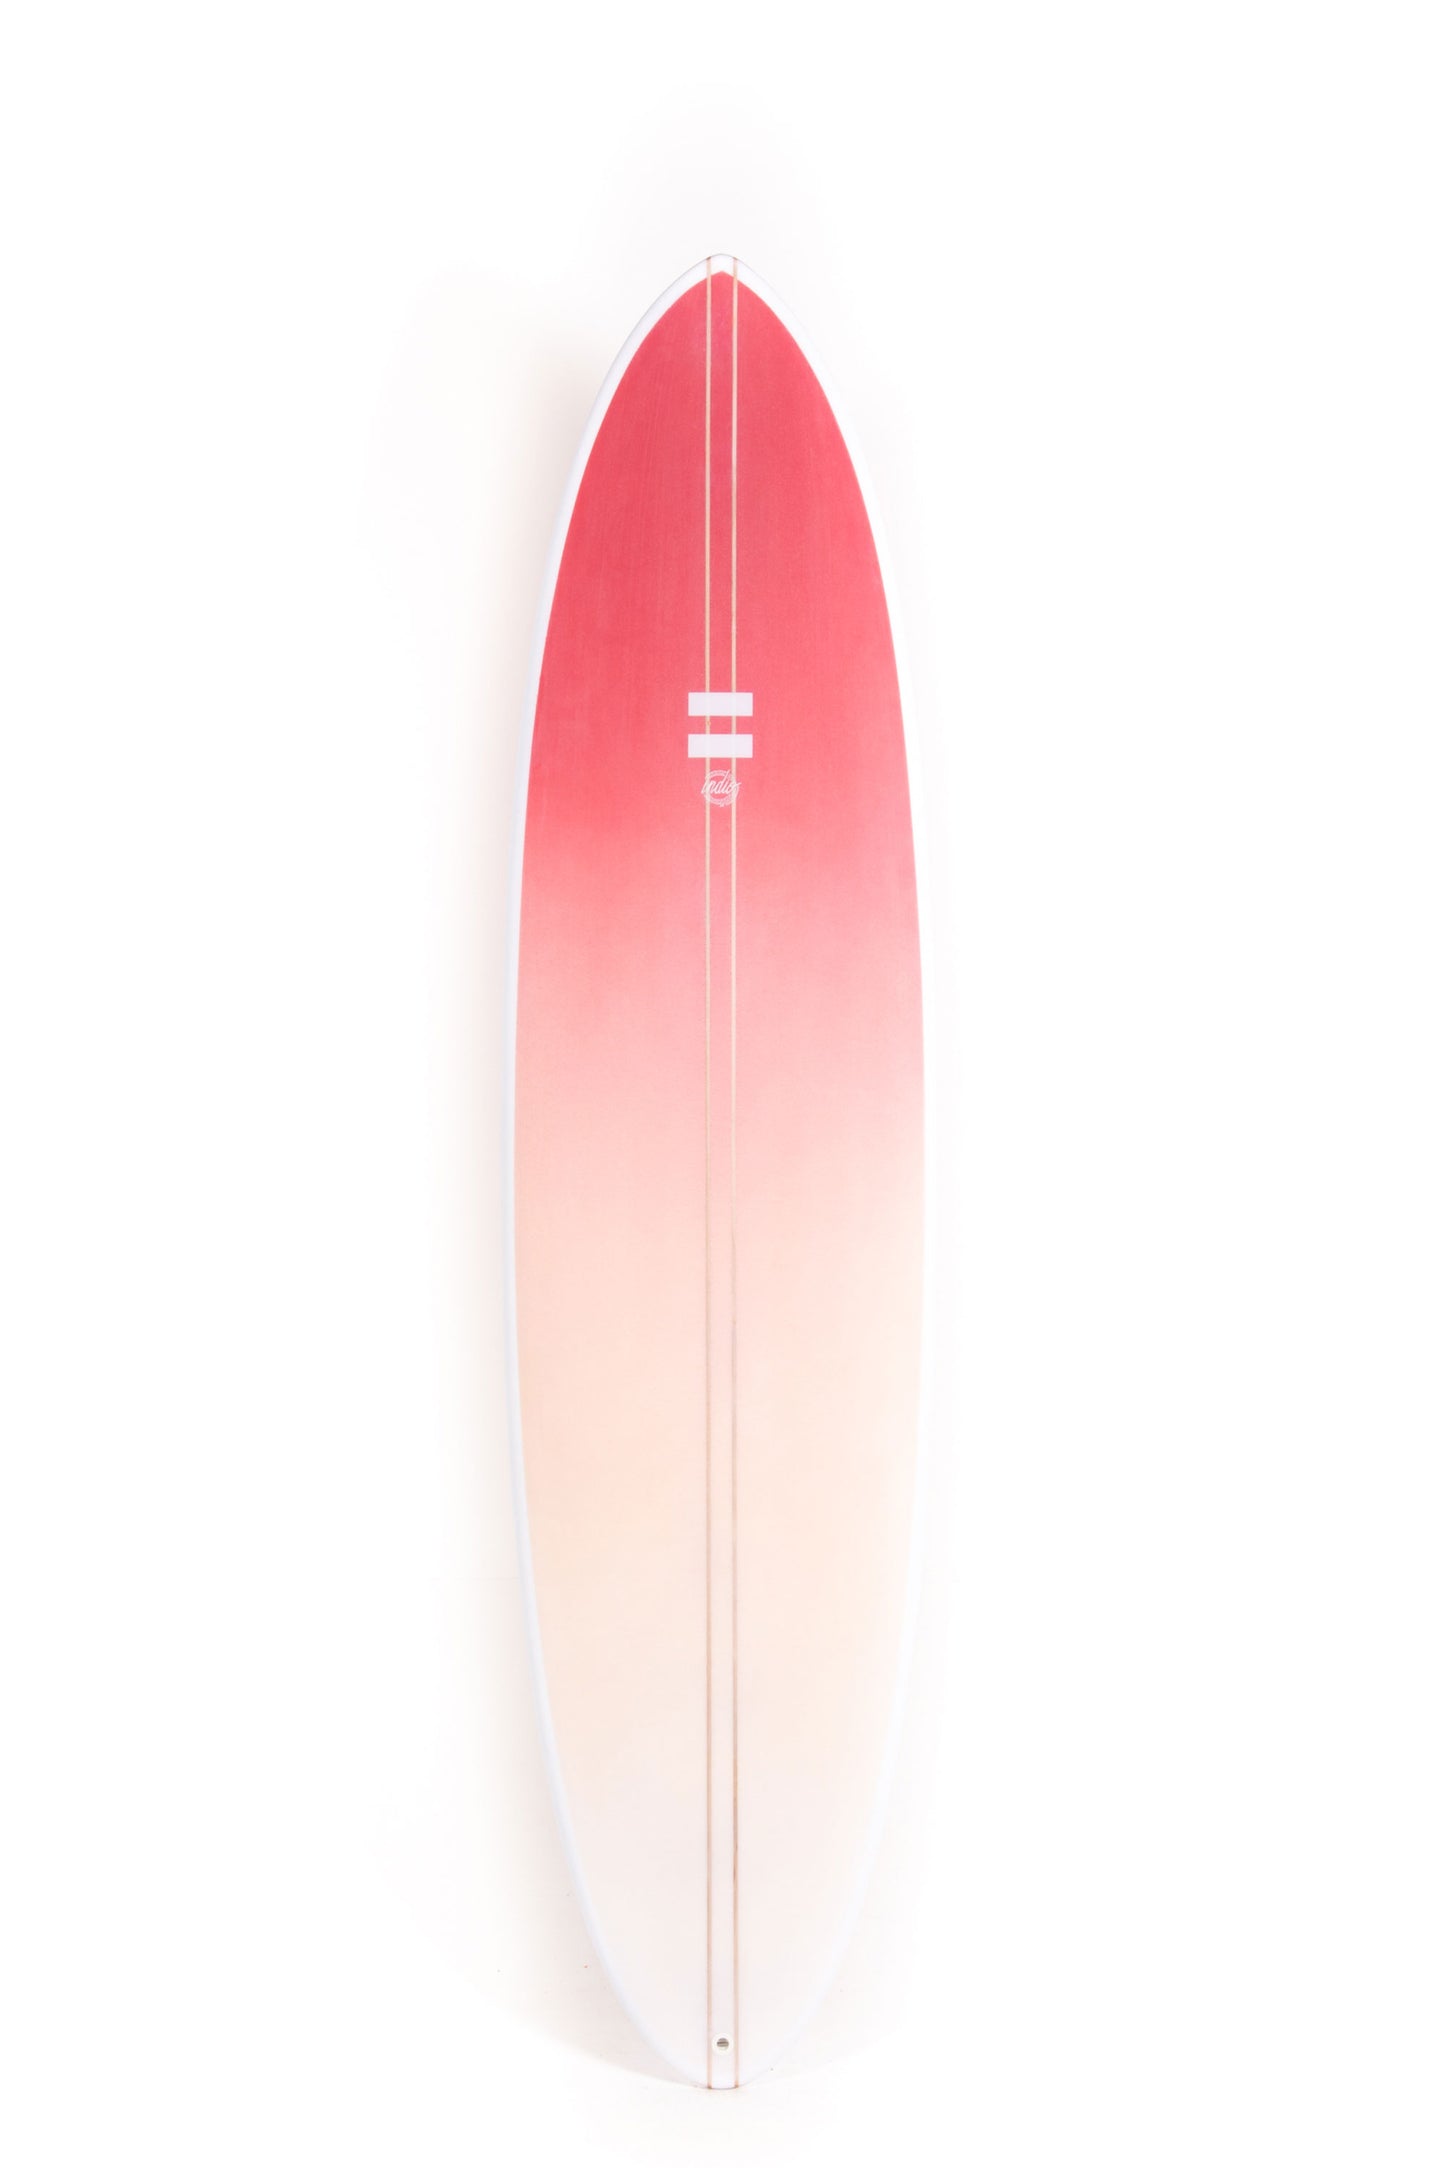 Pukas-Surf-Shop-Indio-Surfboards-The-Egg-red-7_10